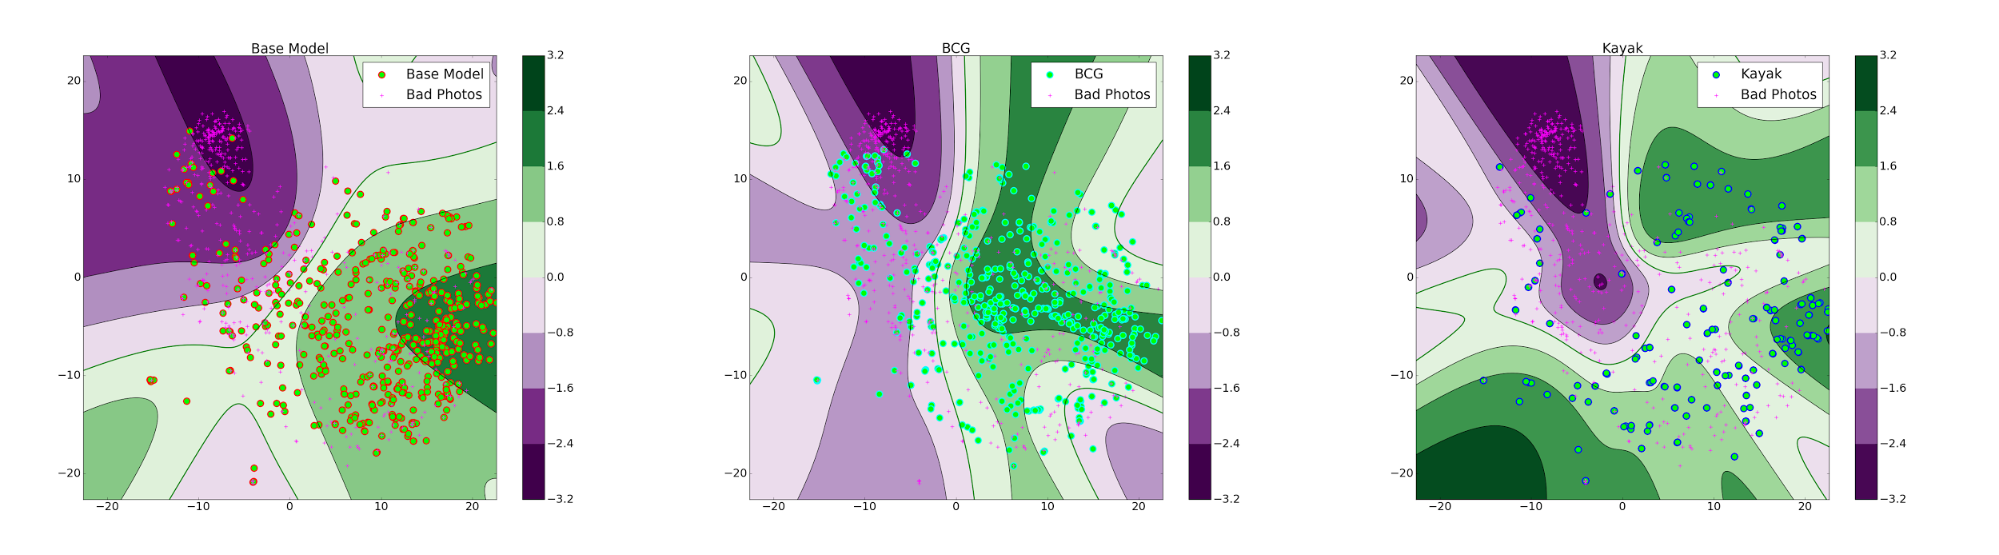 Figure 6: The contour plot of ranking scores in t-SNE space. The green regions indicate areas where a photograph is given a high rank and purple region indicate regions where a photo is given a low rank.